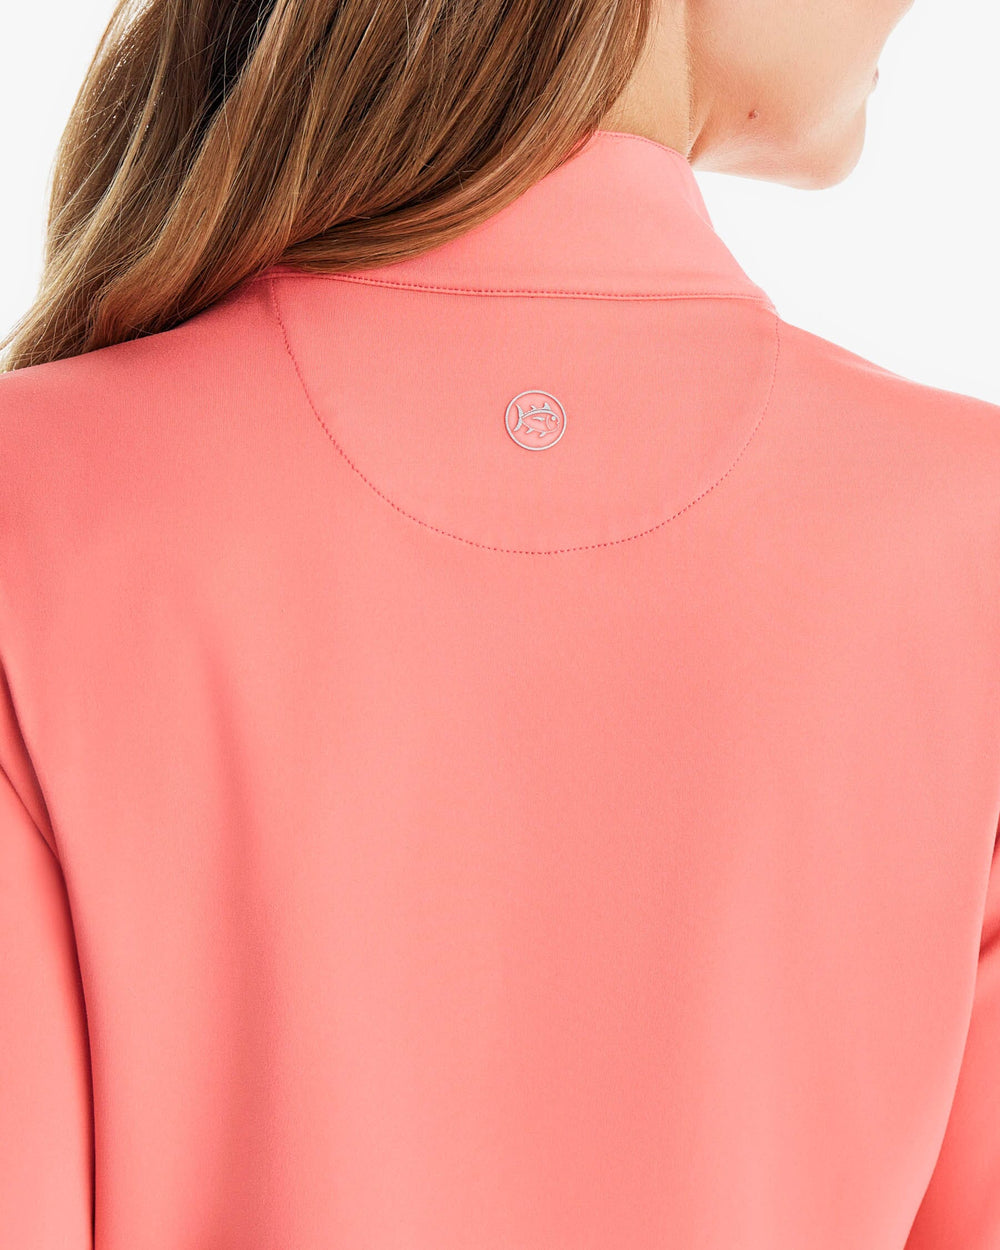 The back view of the Southern Tide Josette Mixed Media Full Zip Jacket by Southern Tide - Sunkist Coral